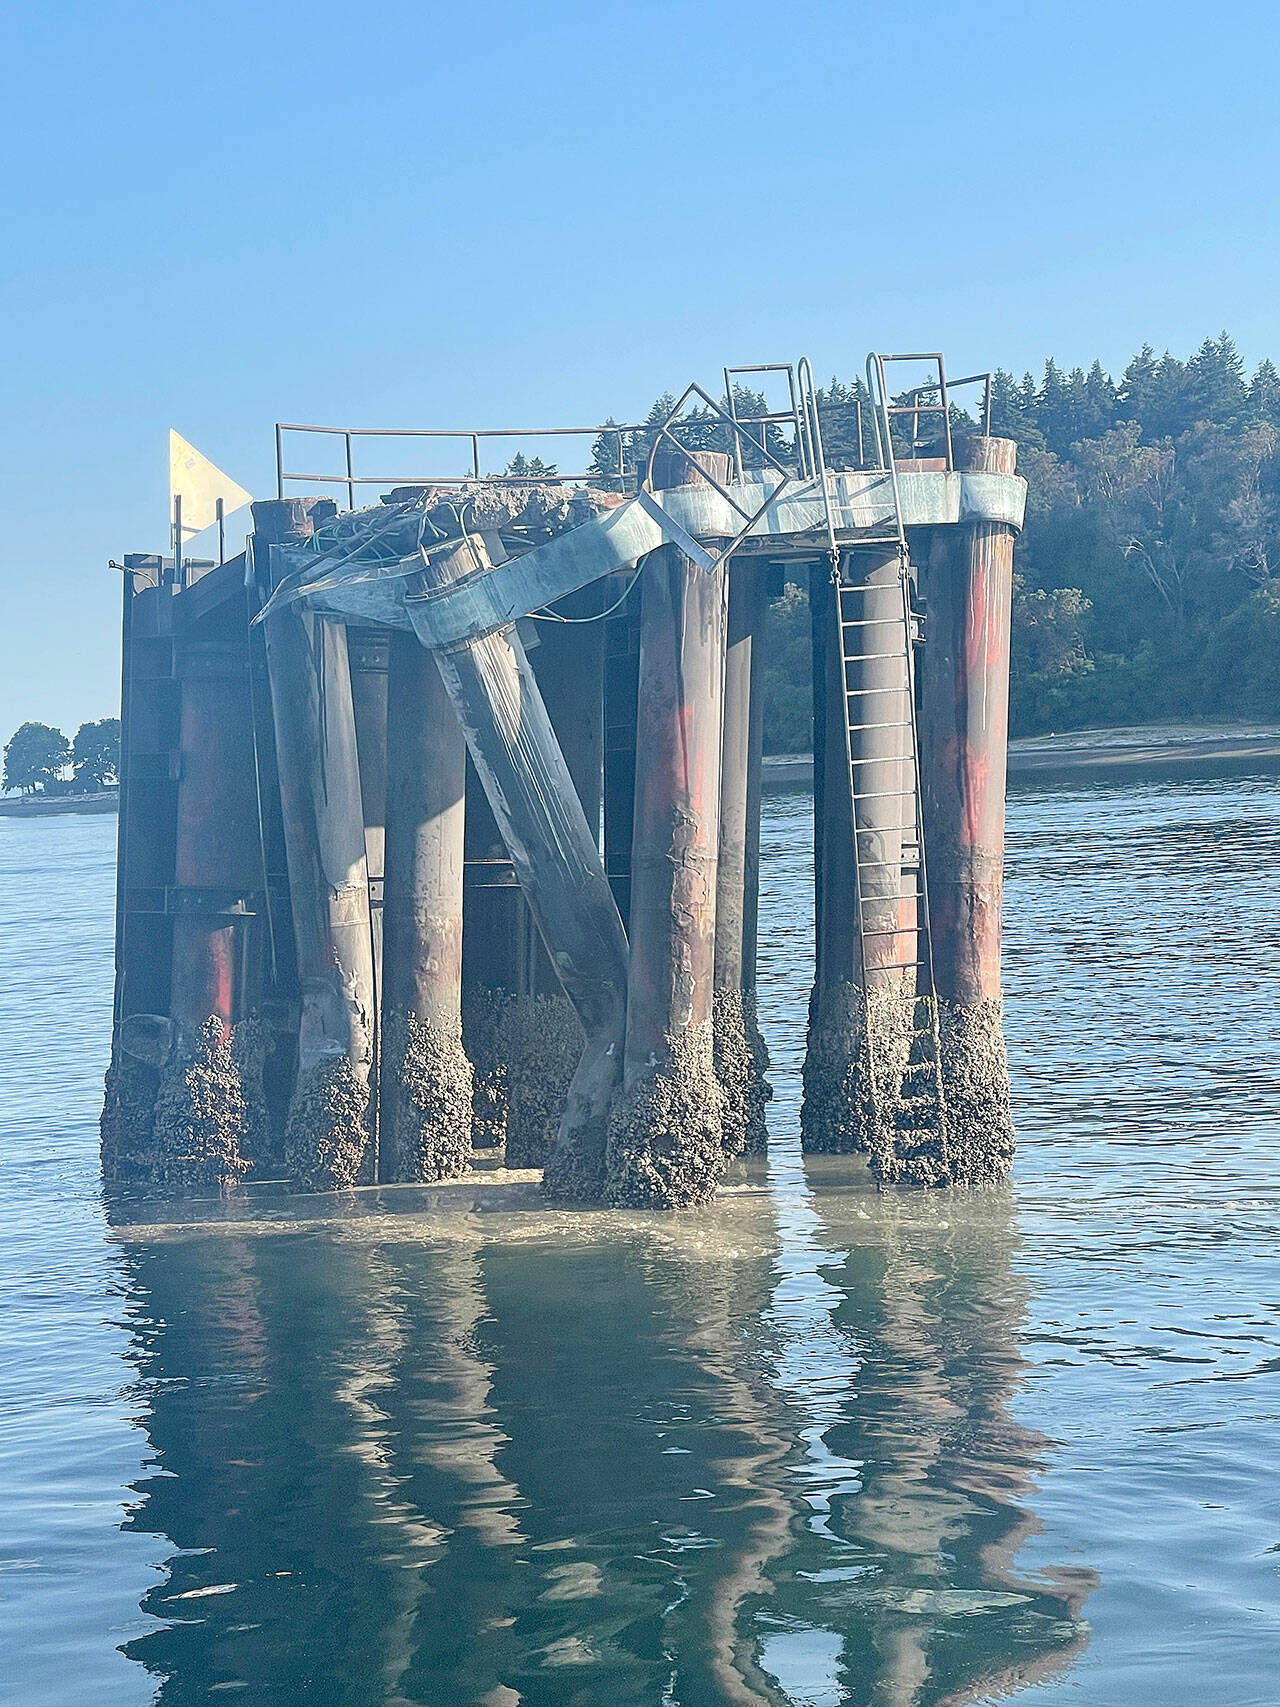 Pam Kirkpatrick Photo
The Cathlamet crashed into these protective pilings, known as a dolphin, as it missed its approach to the Fauntleroy Ferry Terminal.